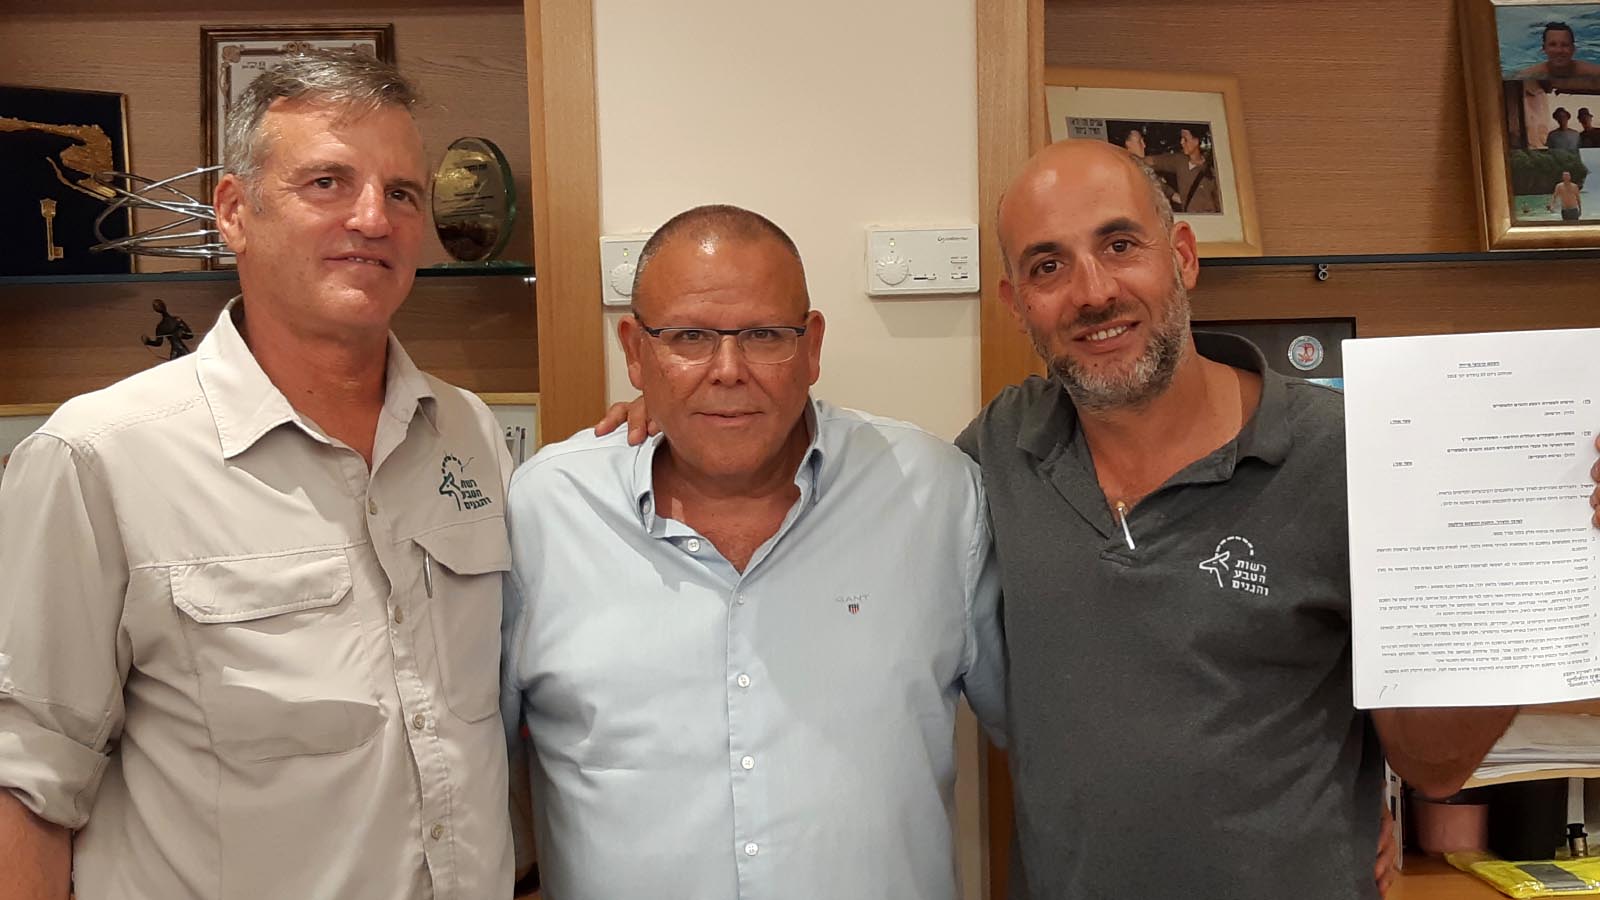 Signing of a collective workers’ agreement for the Nature and Parks Authority, June 2018. Nature and Parks Workers’ Committee Chairman Dudi Keren (right), then Chairman of Histadrut HAMAOF Arnon Bar-David (current Chairman of the Histadrut) and CEO of the Nature and Parks Authority Shaul Goldstein